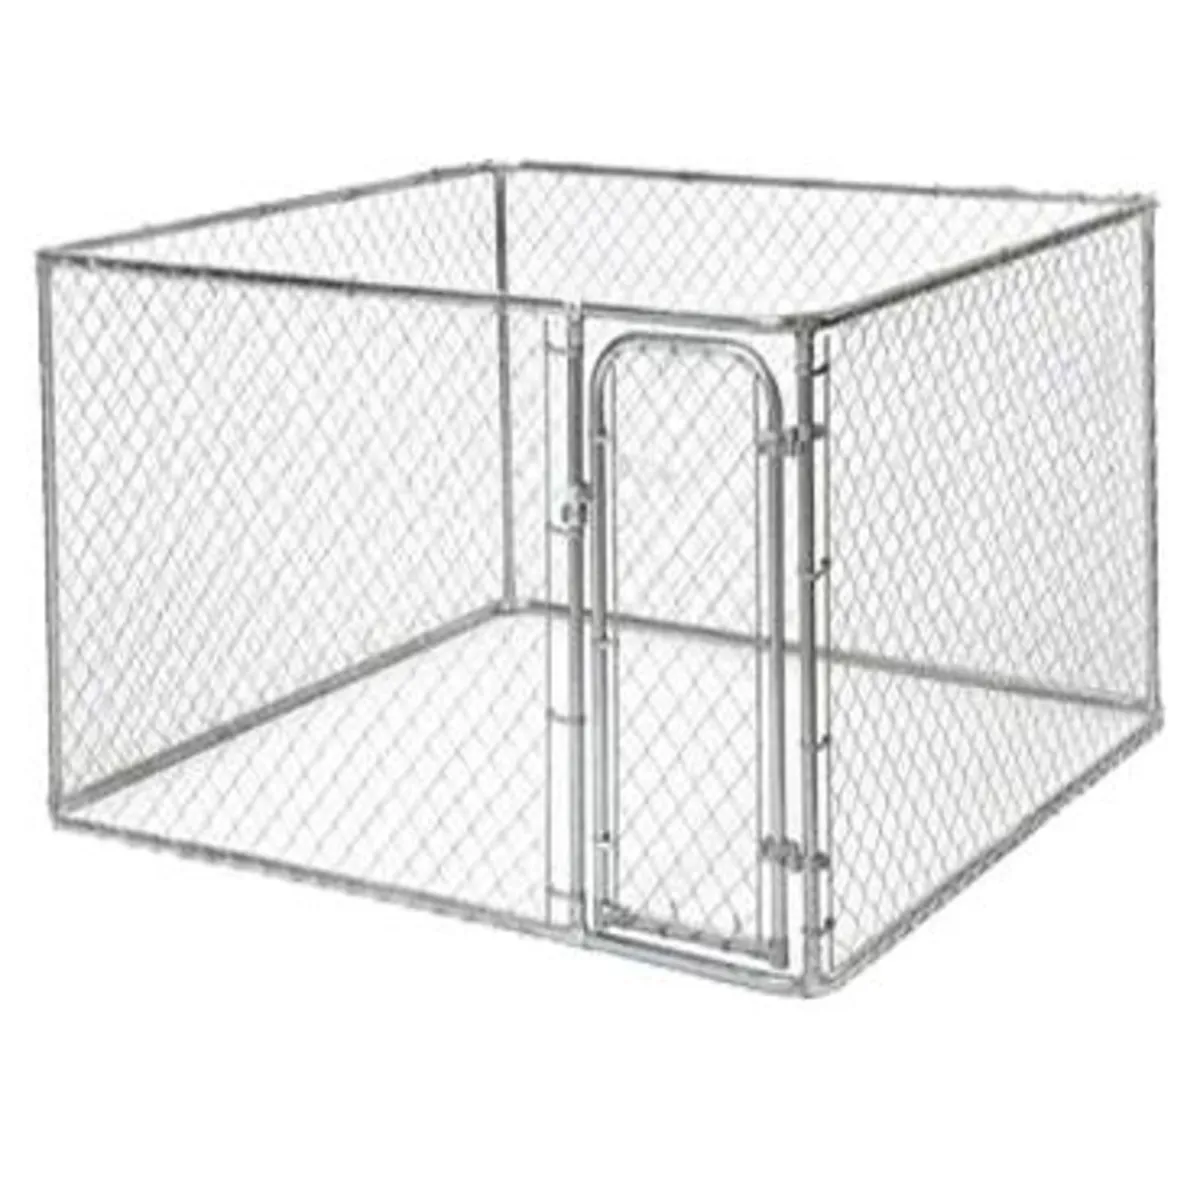 Large Dog Kennel 10 x 10 x 4ft